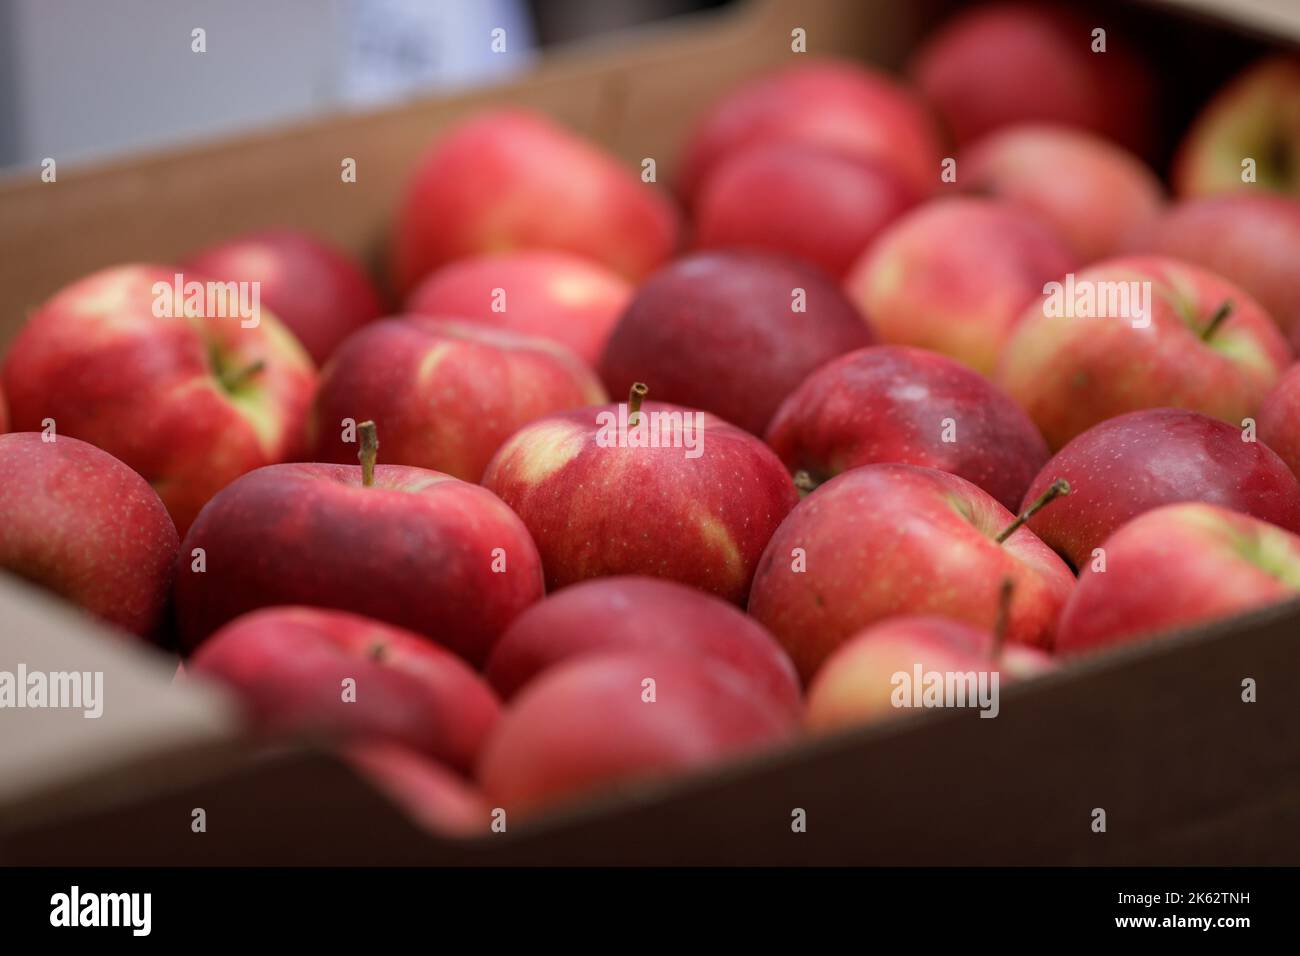 Shallow depth of field (selective focus) details with red apples in an european farmers market. Stock Photo